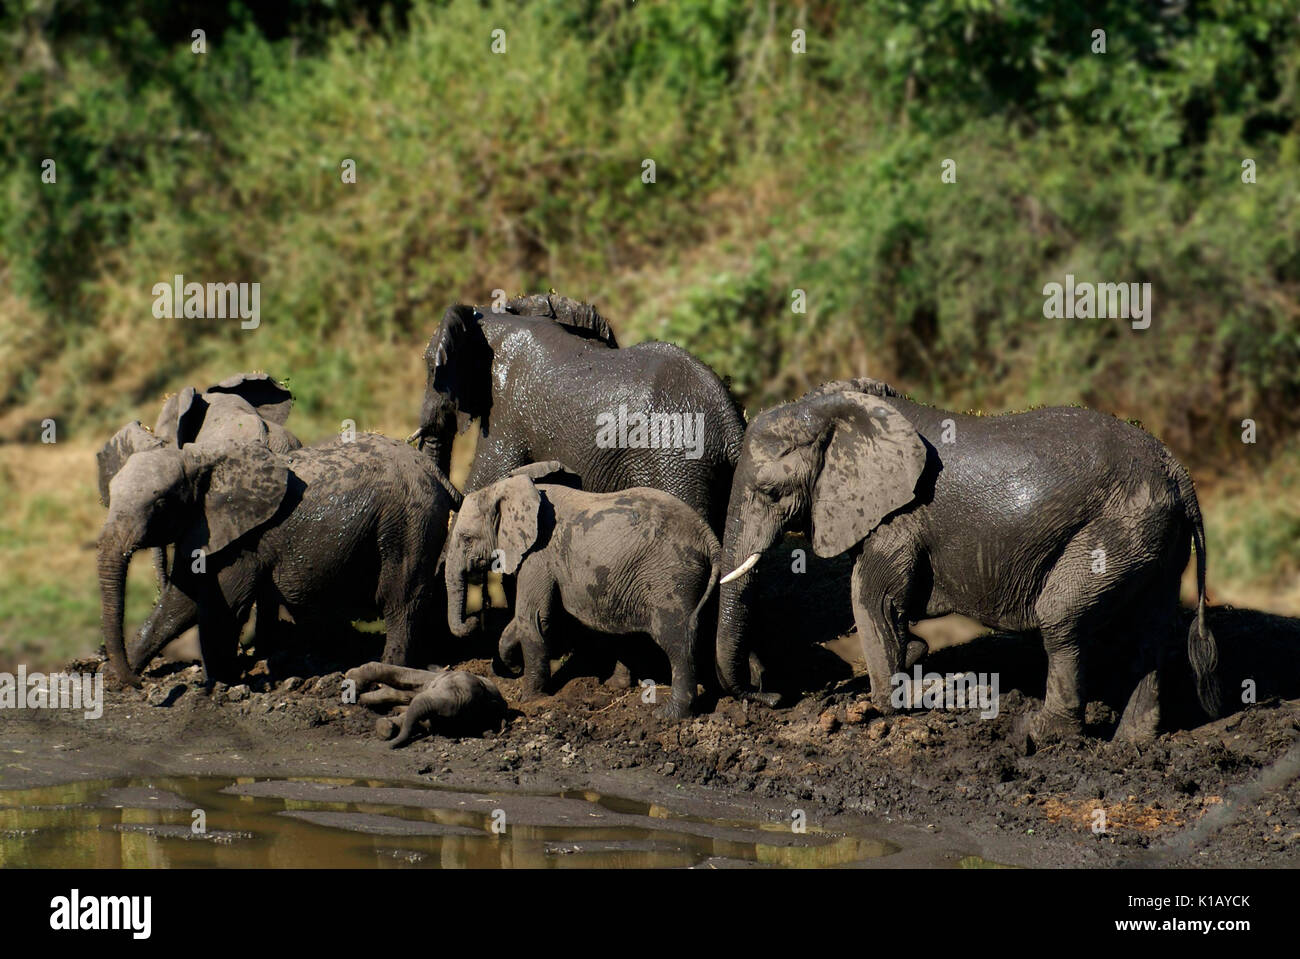 Bath time. A family of elephants in a shallow mud puddle on a hot day, Kruger National Park, South Africa. A common, everyday, mixed group activity. Stock Photo